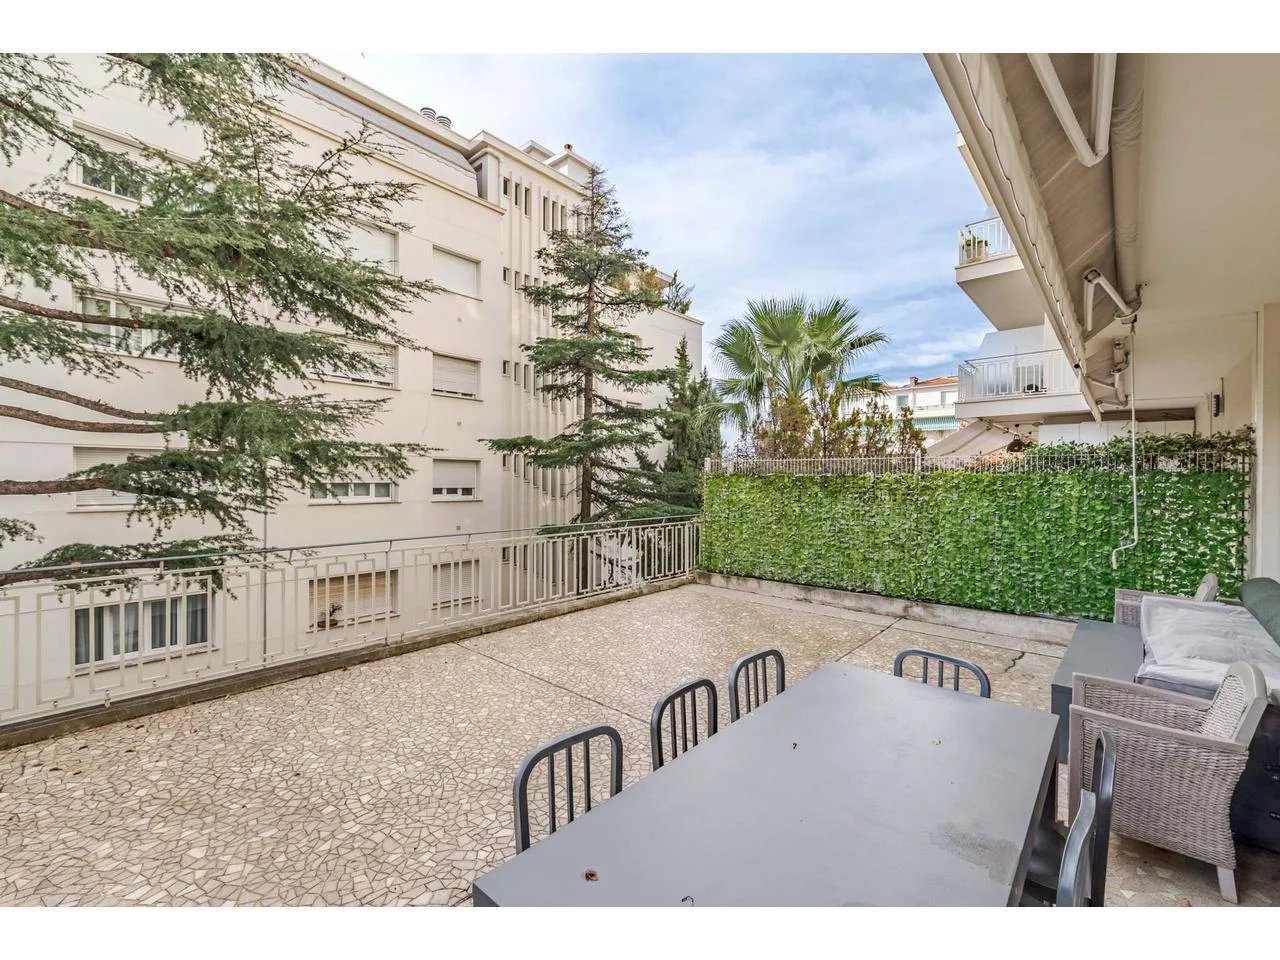 Appartement  2 Rooms 48m2  for sale   350 000 €